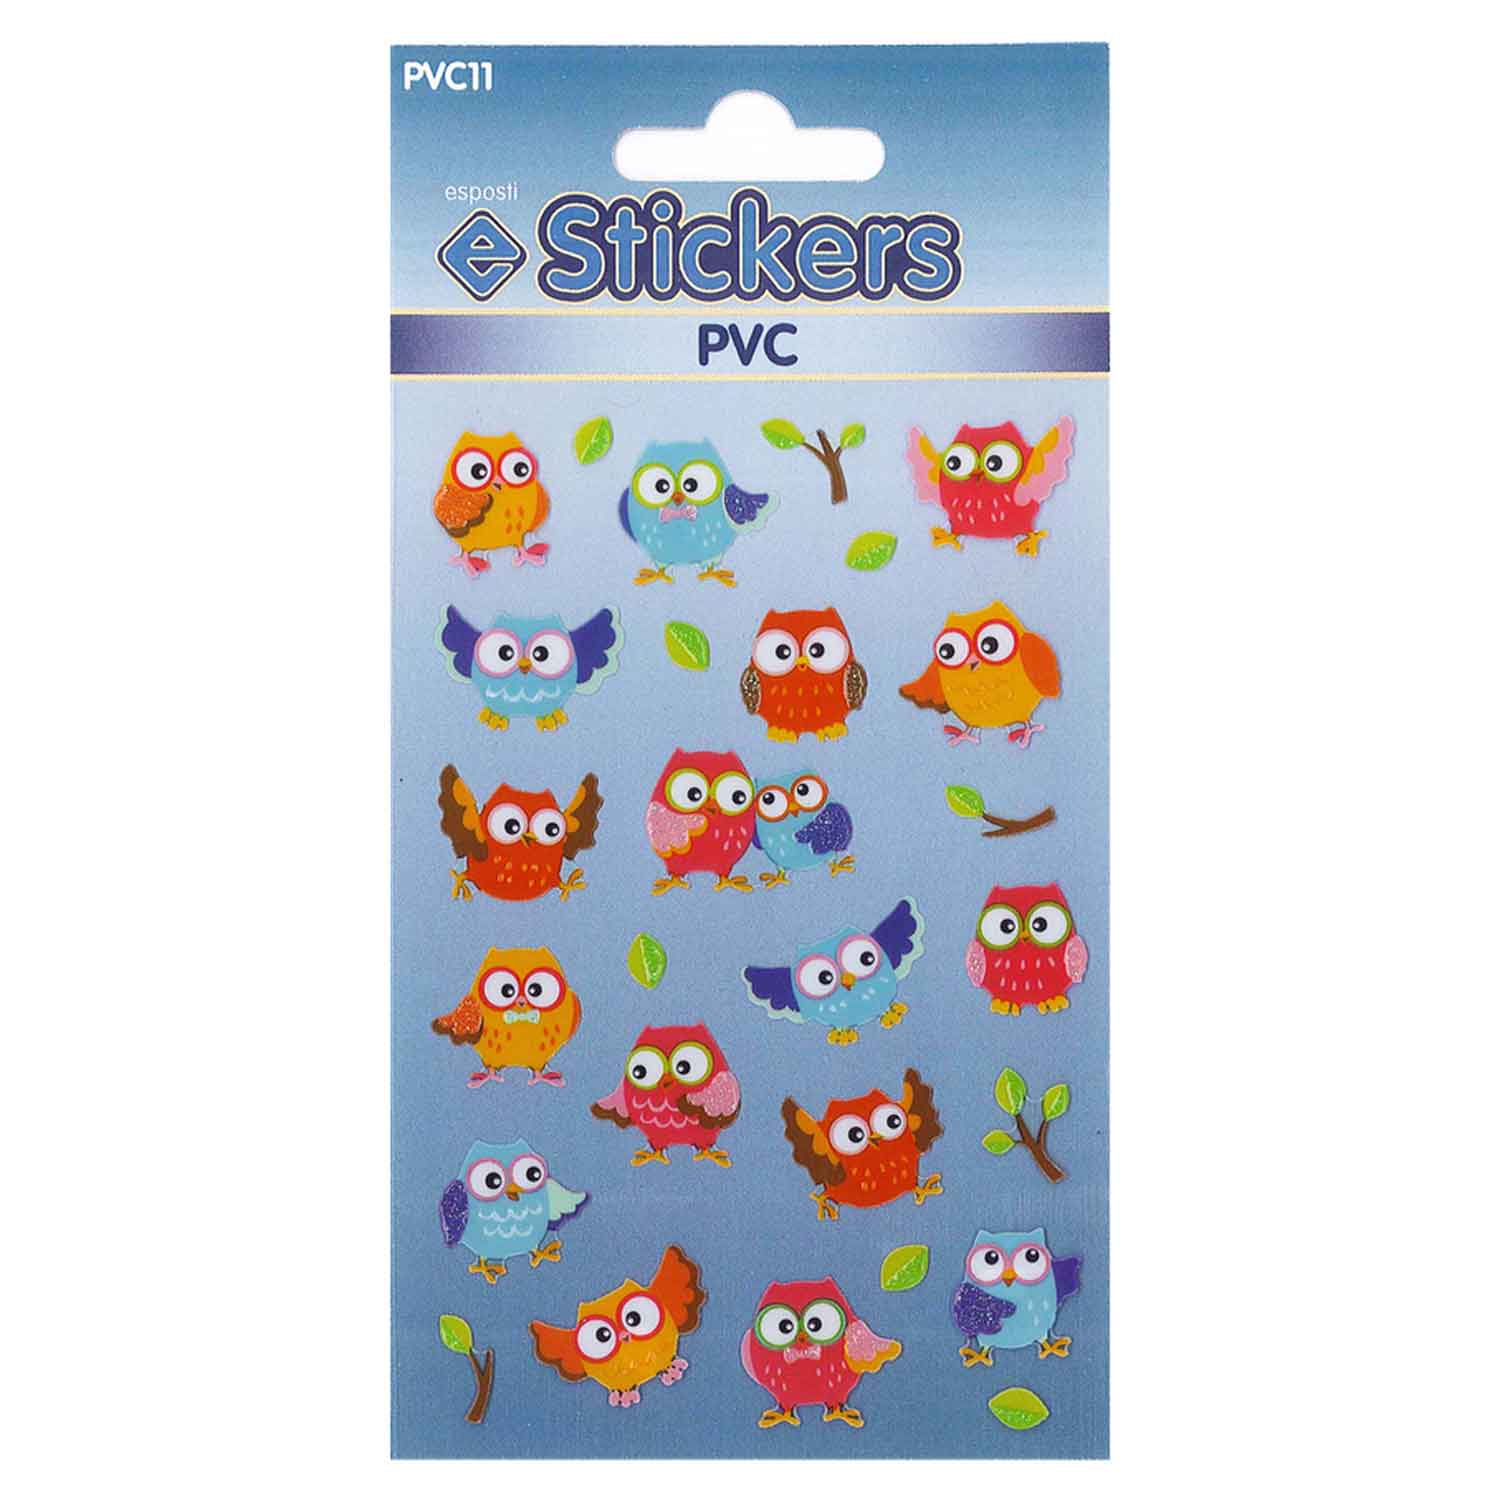 Owls Self Adhesive PVC Novelty Stickers - Pack of 10